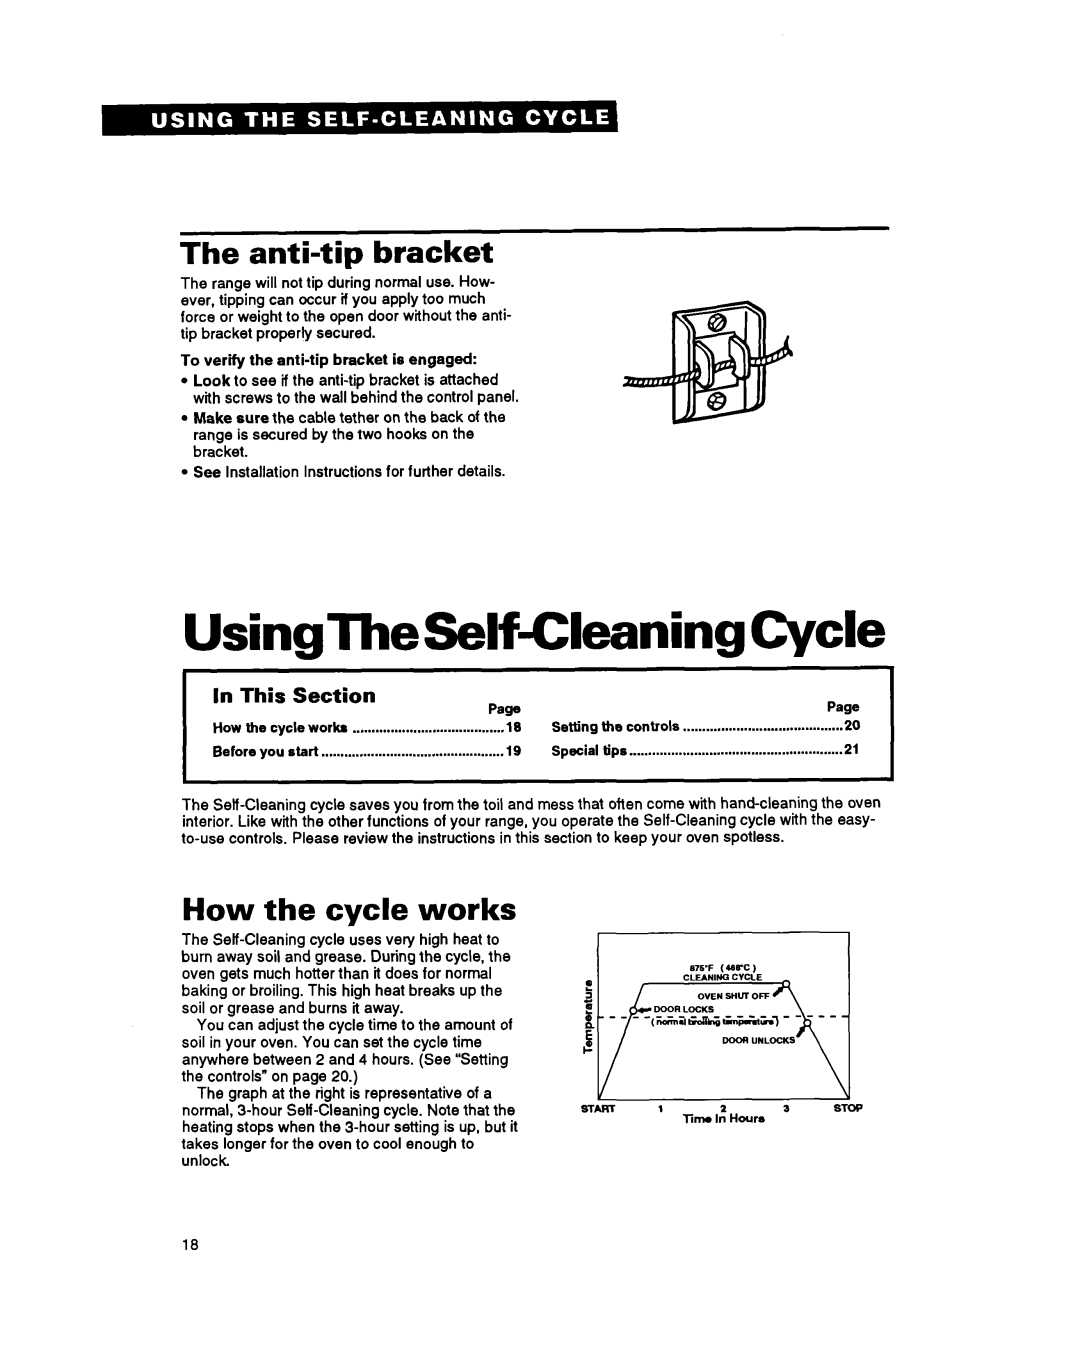 Whirlpool FES310Y manual UsingTheSelf-GleaningCycle, The anti-tipbracket, How the cycle works, This, Section, Page 